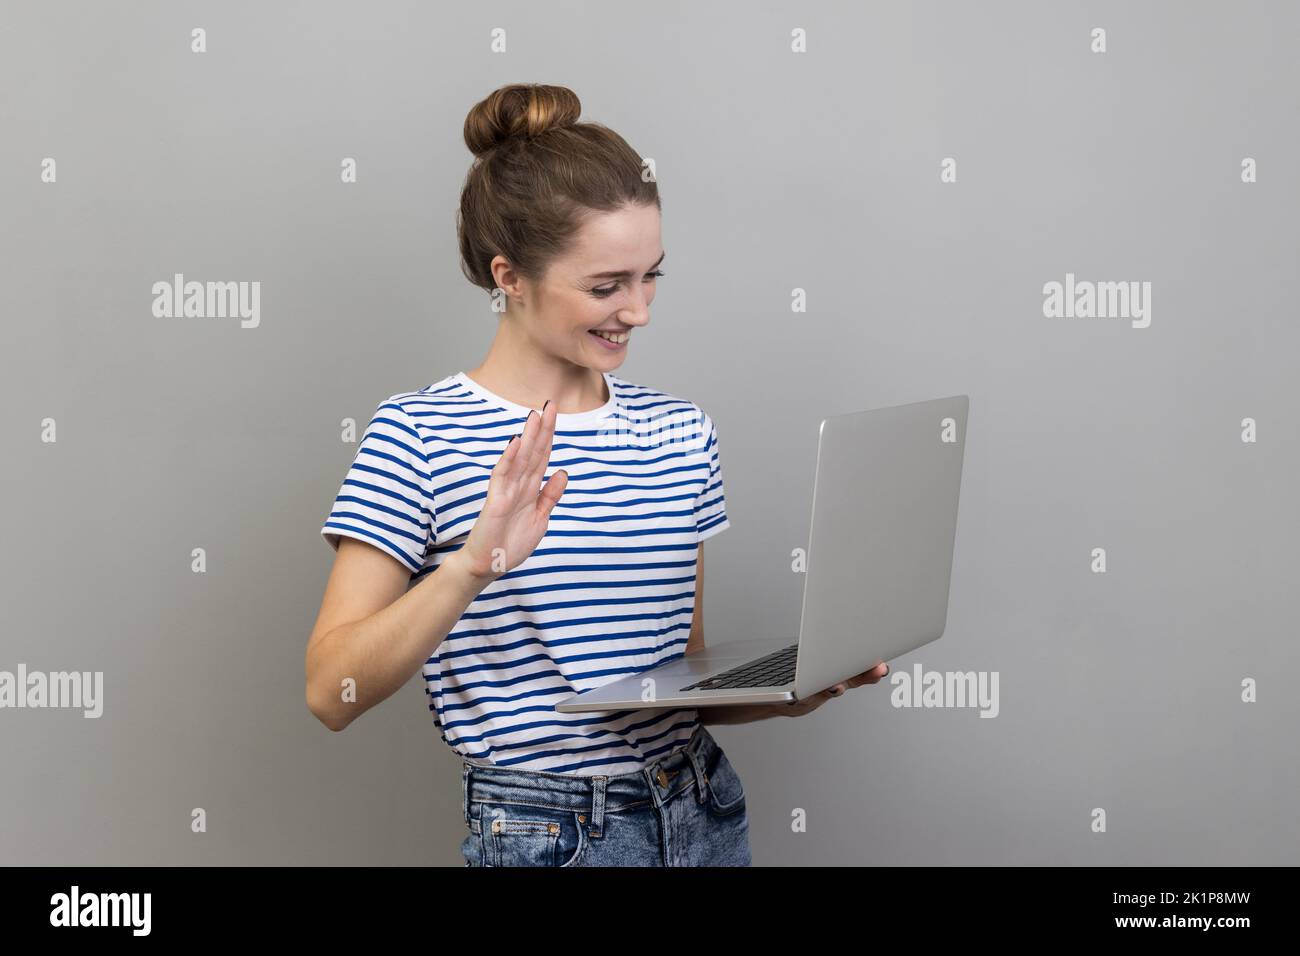 Portrait of friendly woman wearing striped T-shirt standing with laptop, looking at display and waving hand, saying hi, having video call. Indoor studio shot isolated on gray background. Stock Photo